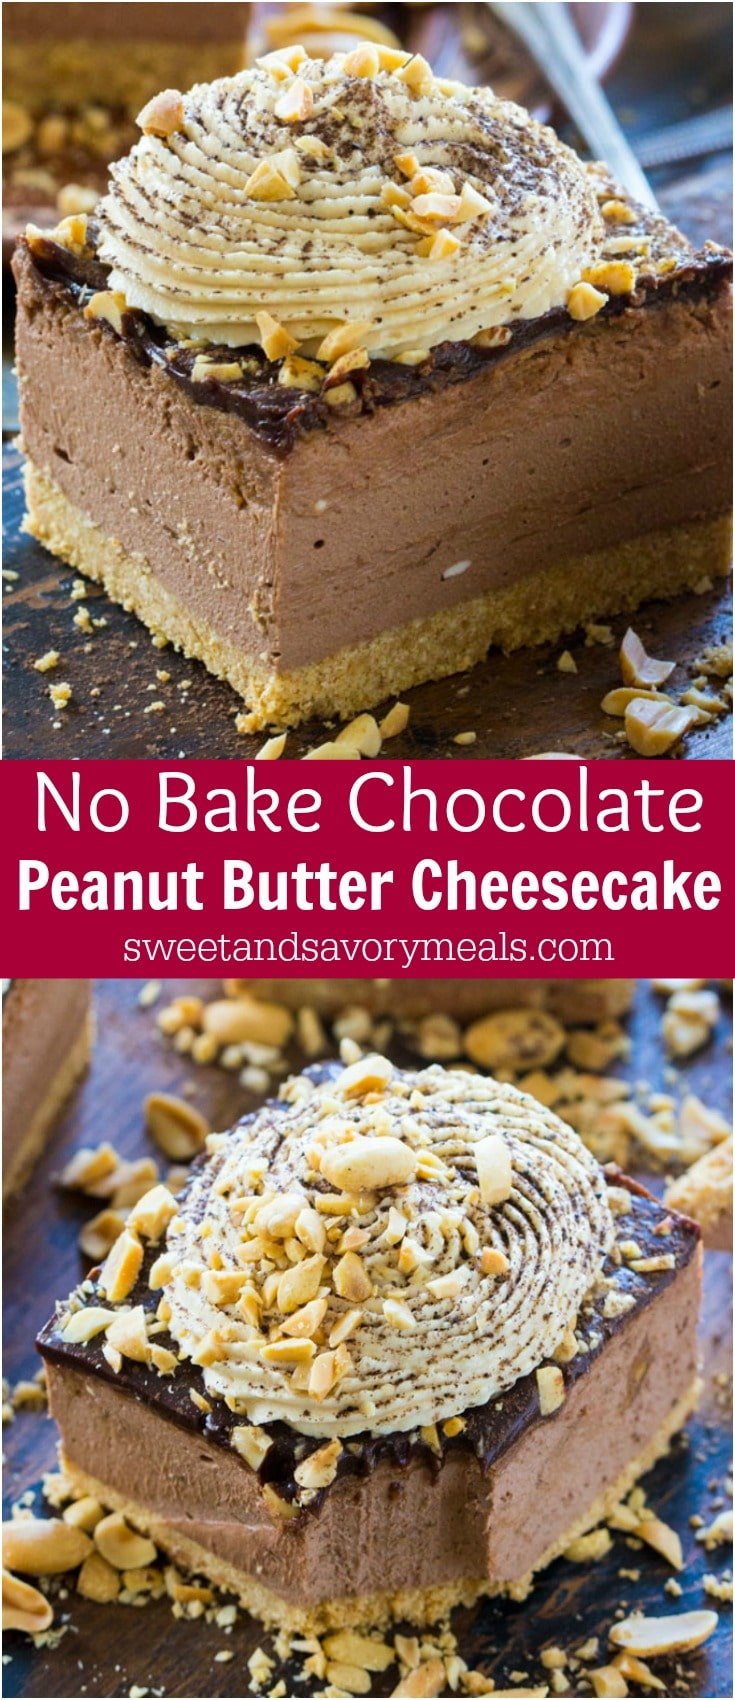 Chocolate Peanut Butter Cheesecake with no cracks or cooking time, because this delicious cheesecake is no bake with a perfect creamy texture.